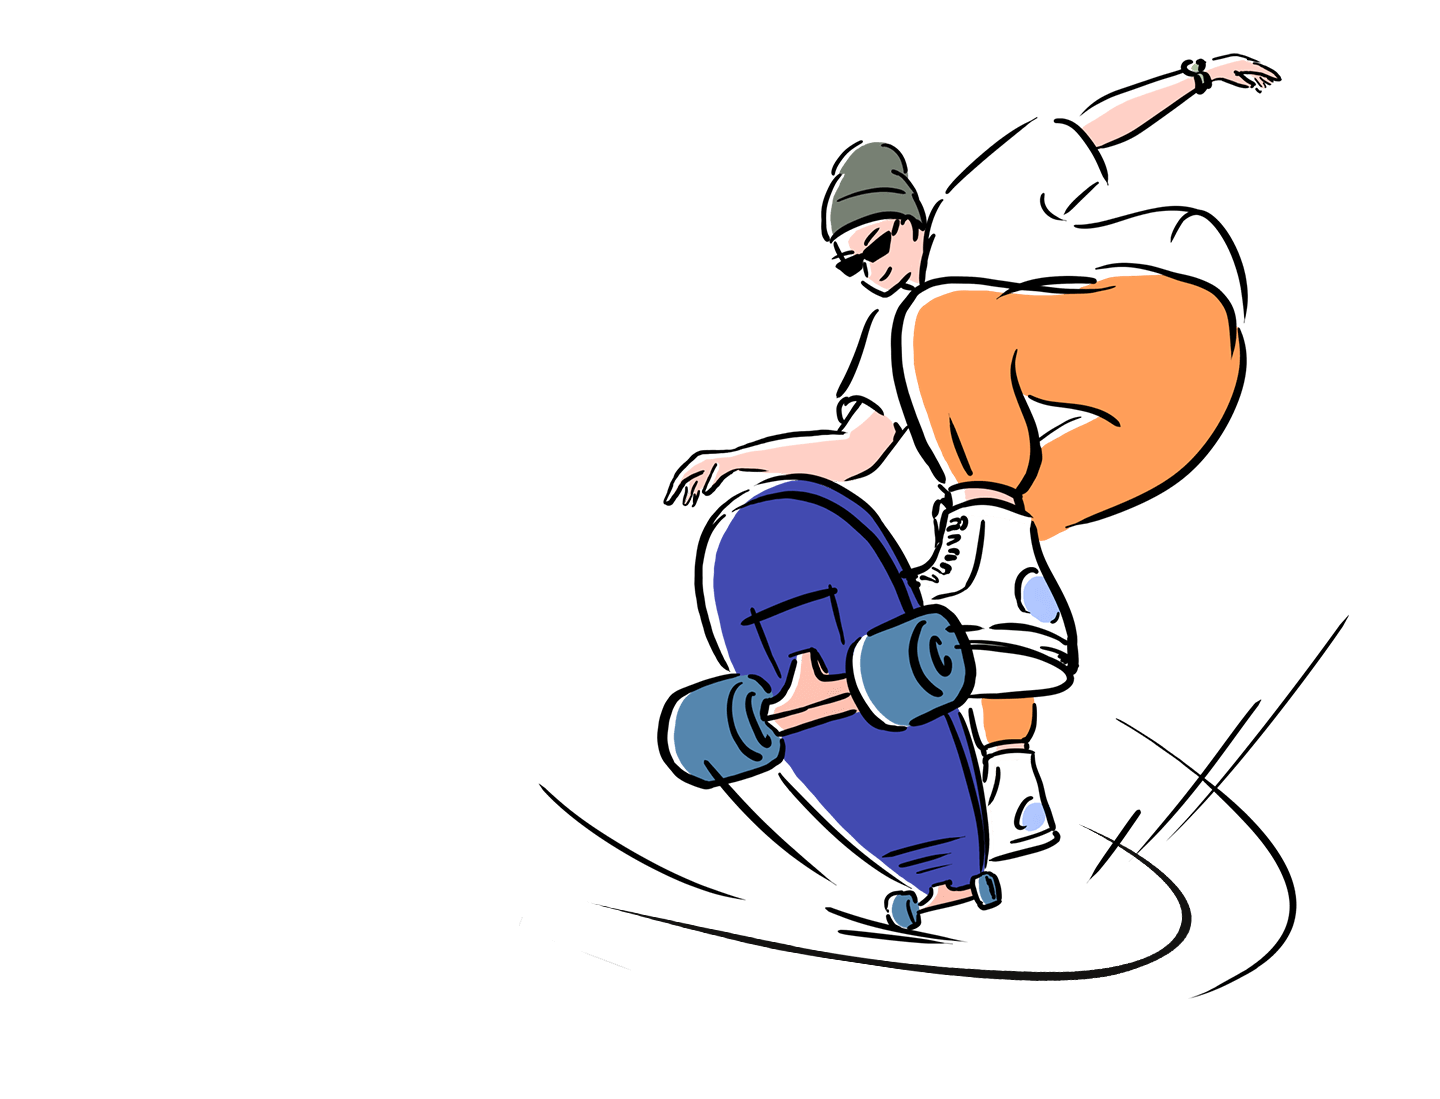 The line becomes an illustration of a girl skateboarding, showing how you can use S Pen just like a real pen